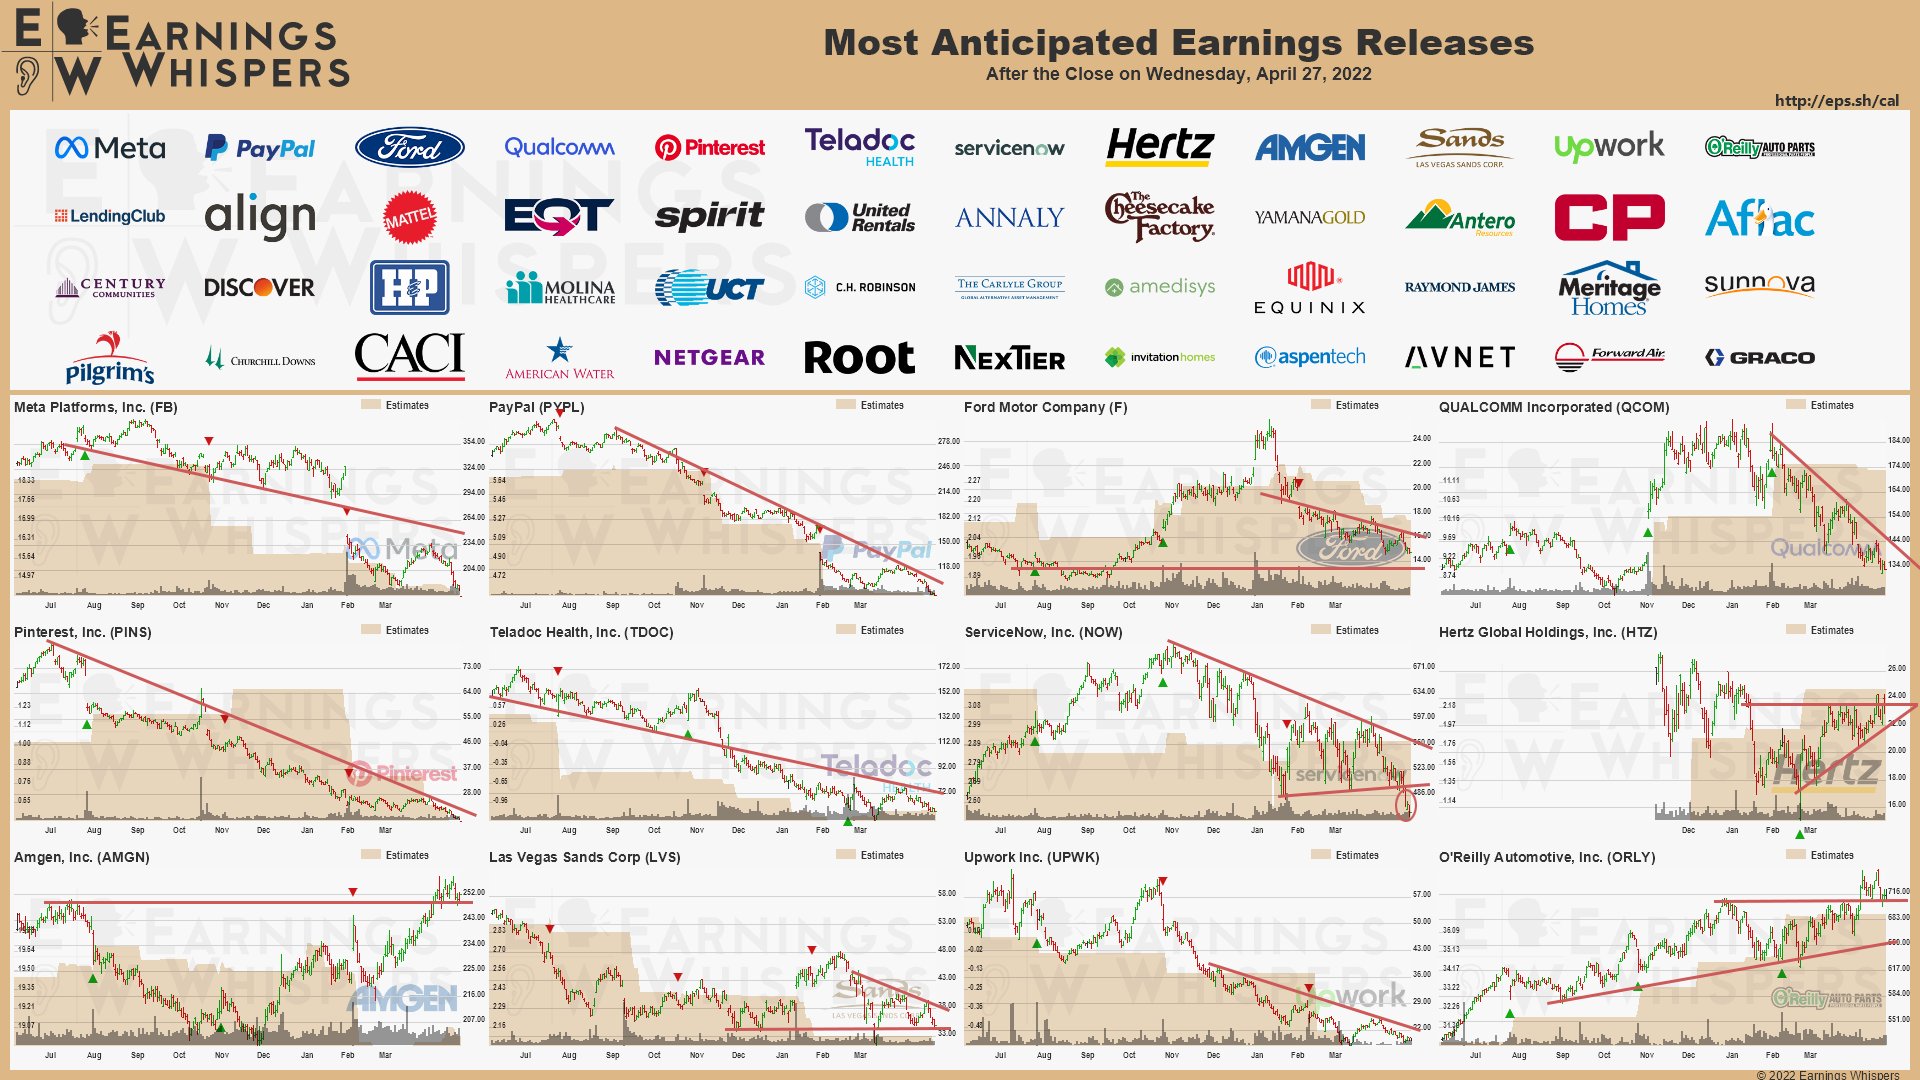 20220427 Earnings after